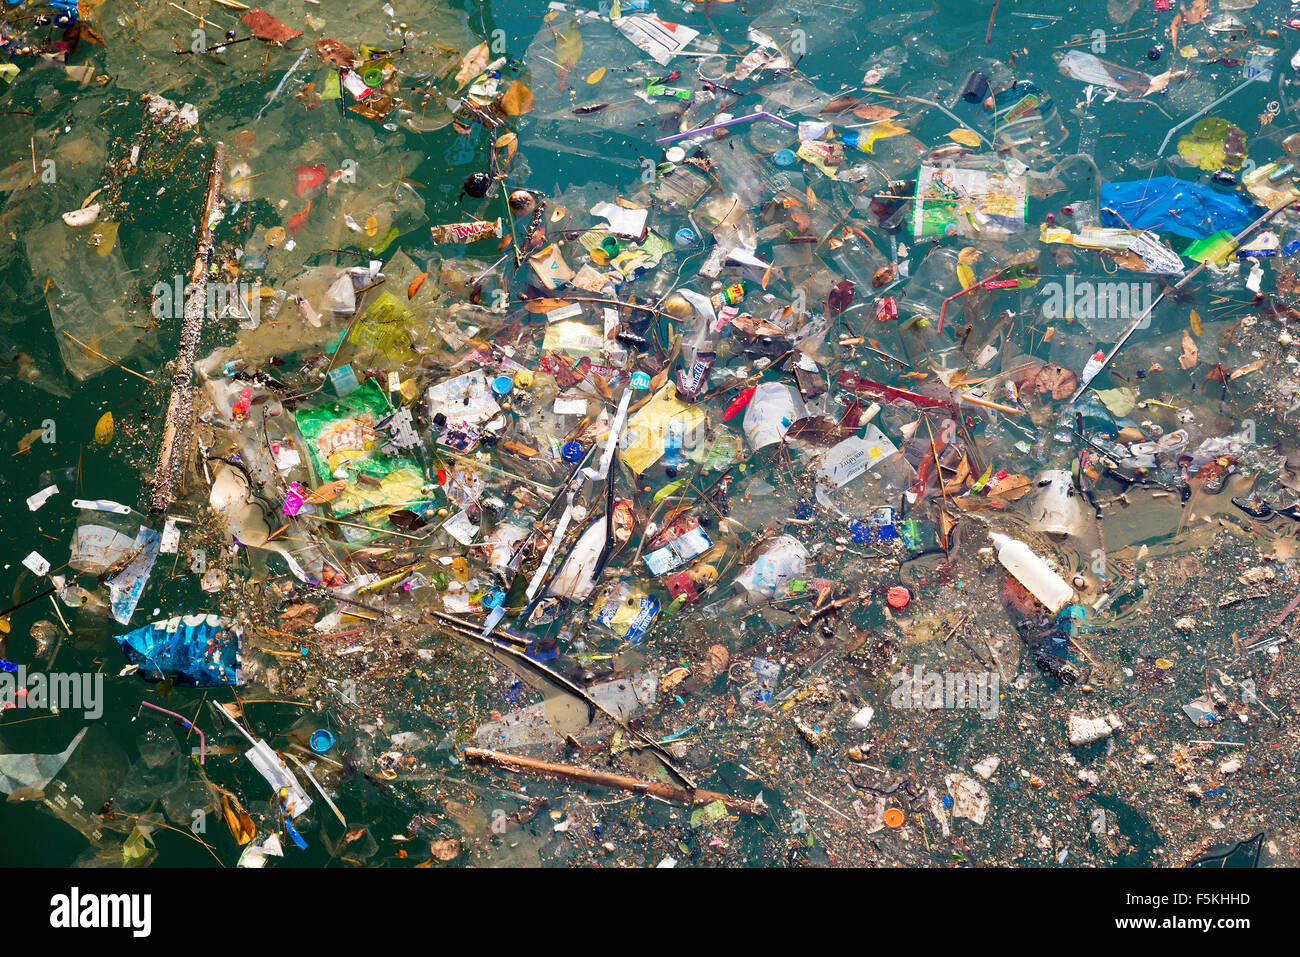 ATHENS, GREECE - OCTOBER 25, 2015: Port of Piraeus, a large amount of trash polluting the wate Stock Photo